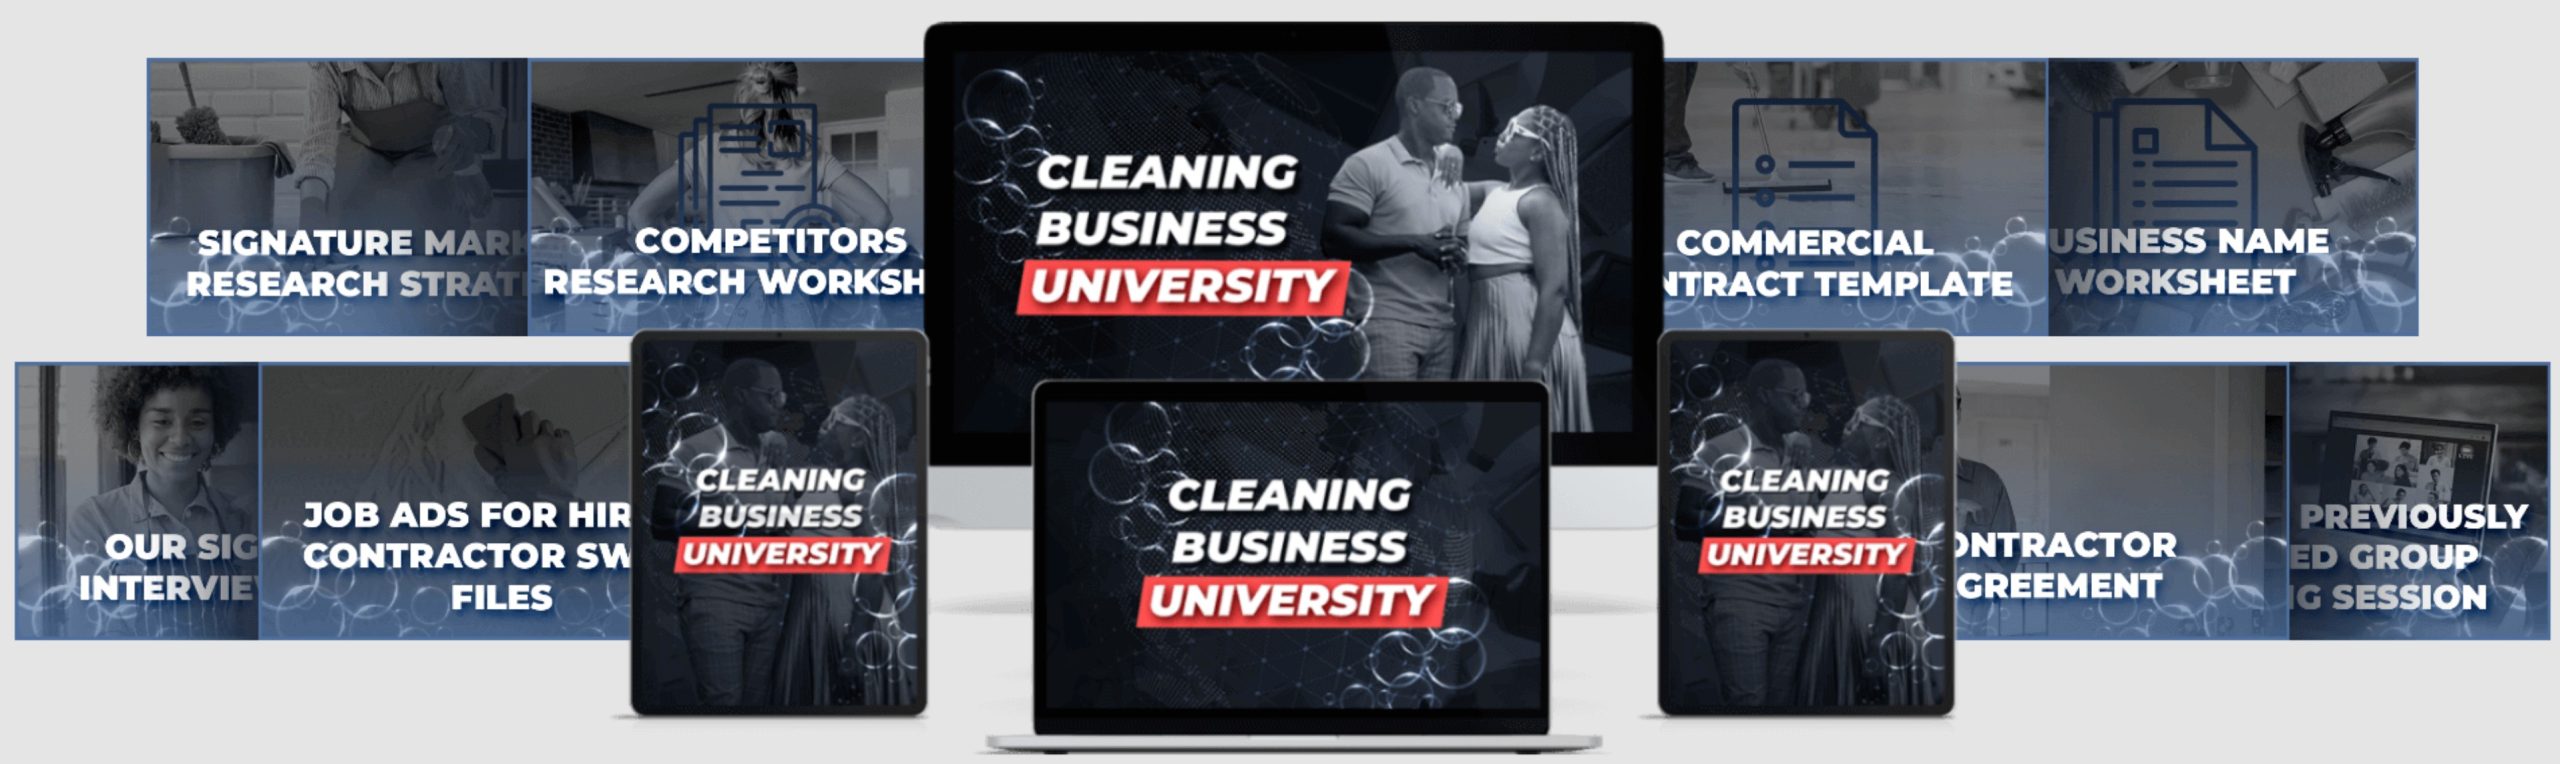 What Is Cleaning Business University